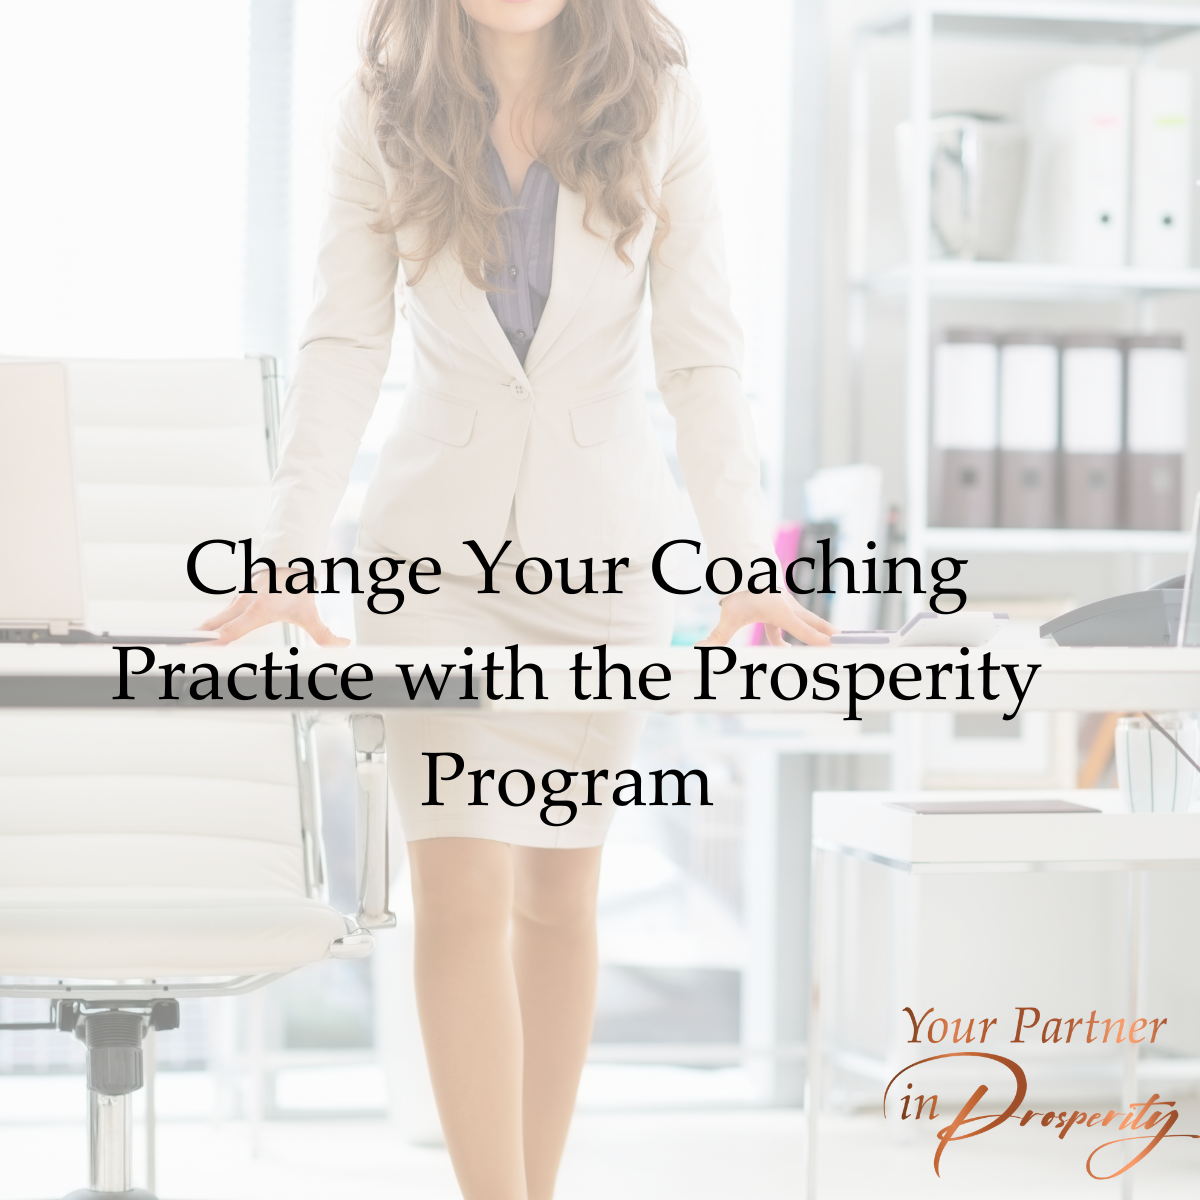 Change Your Coaching Practice with the Prosperity Program